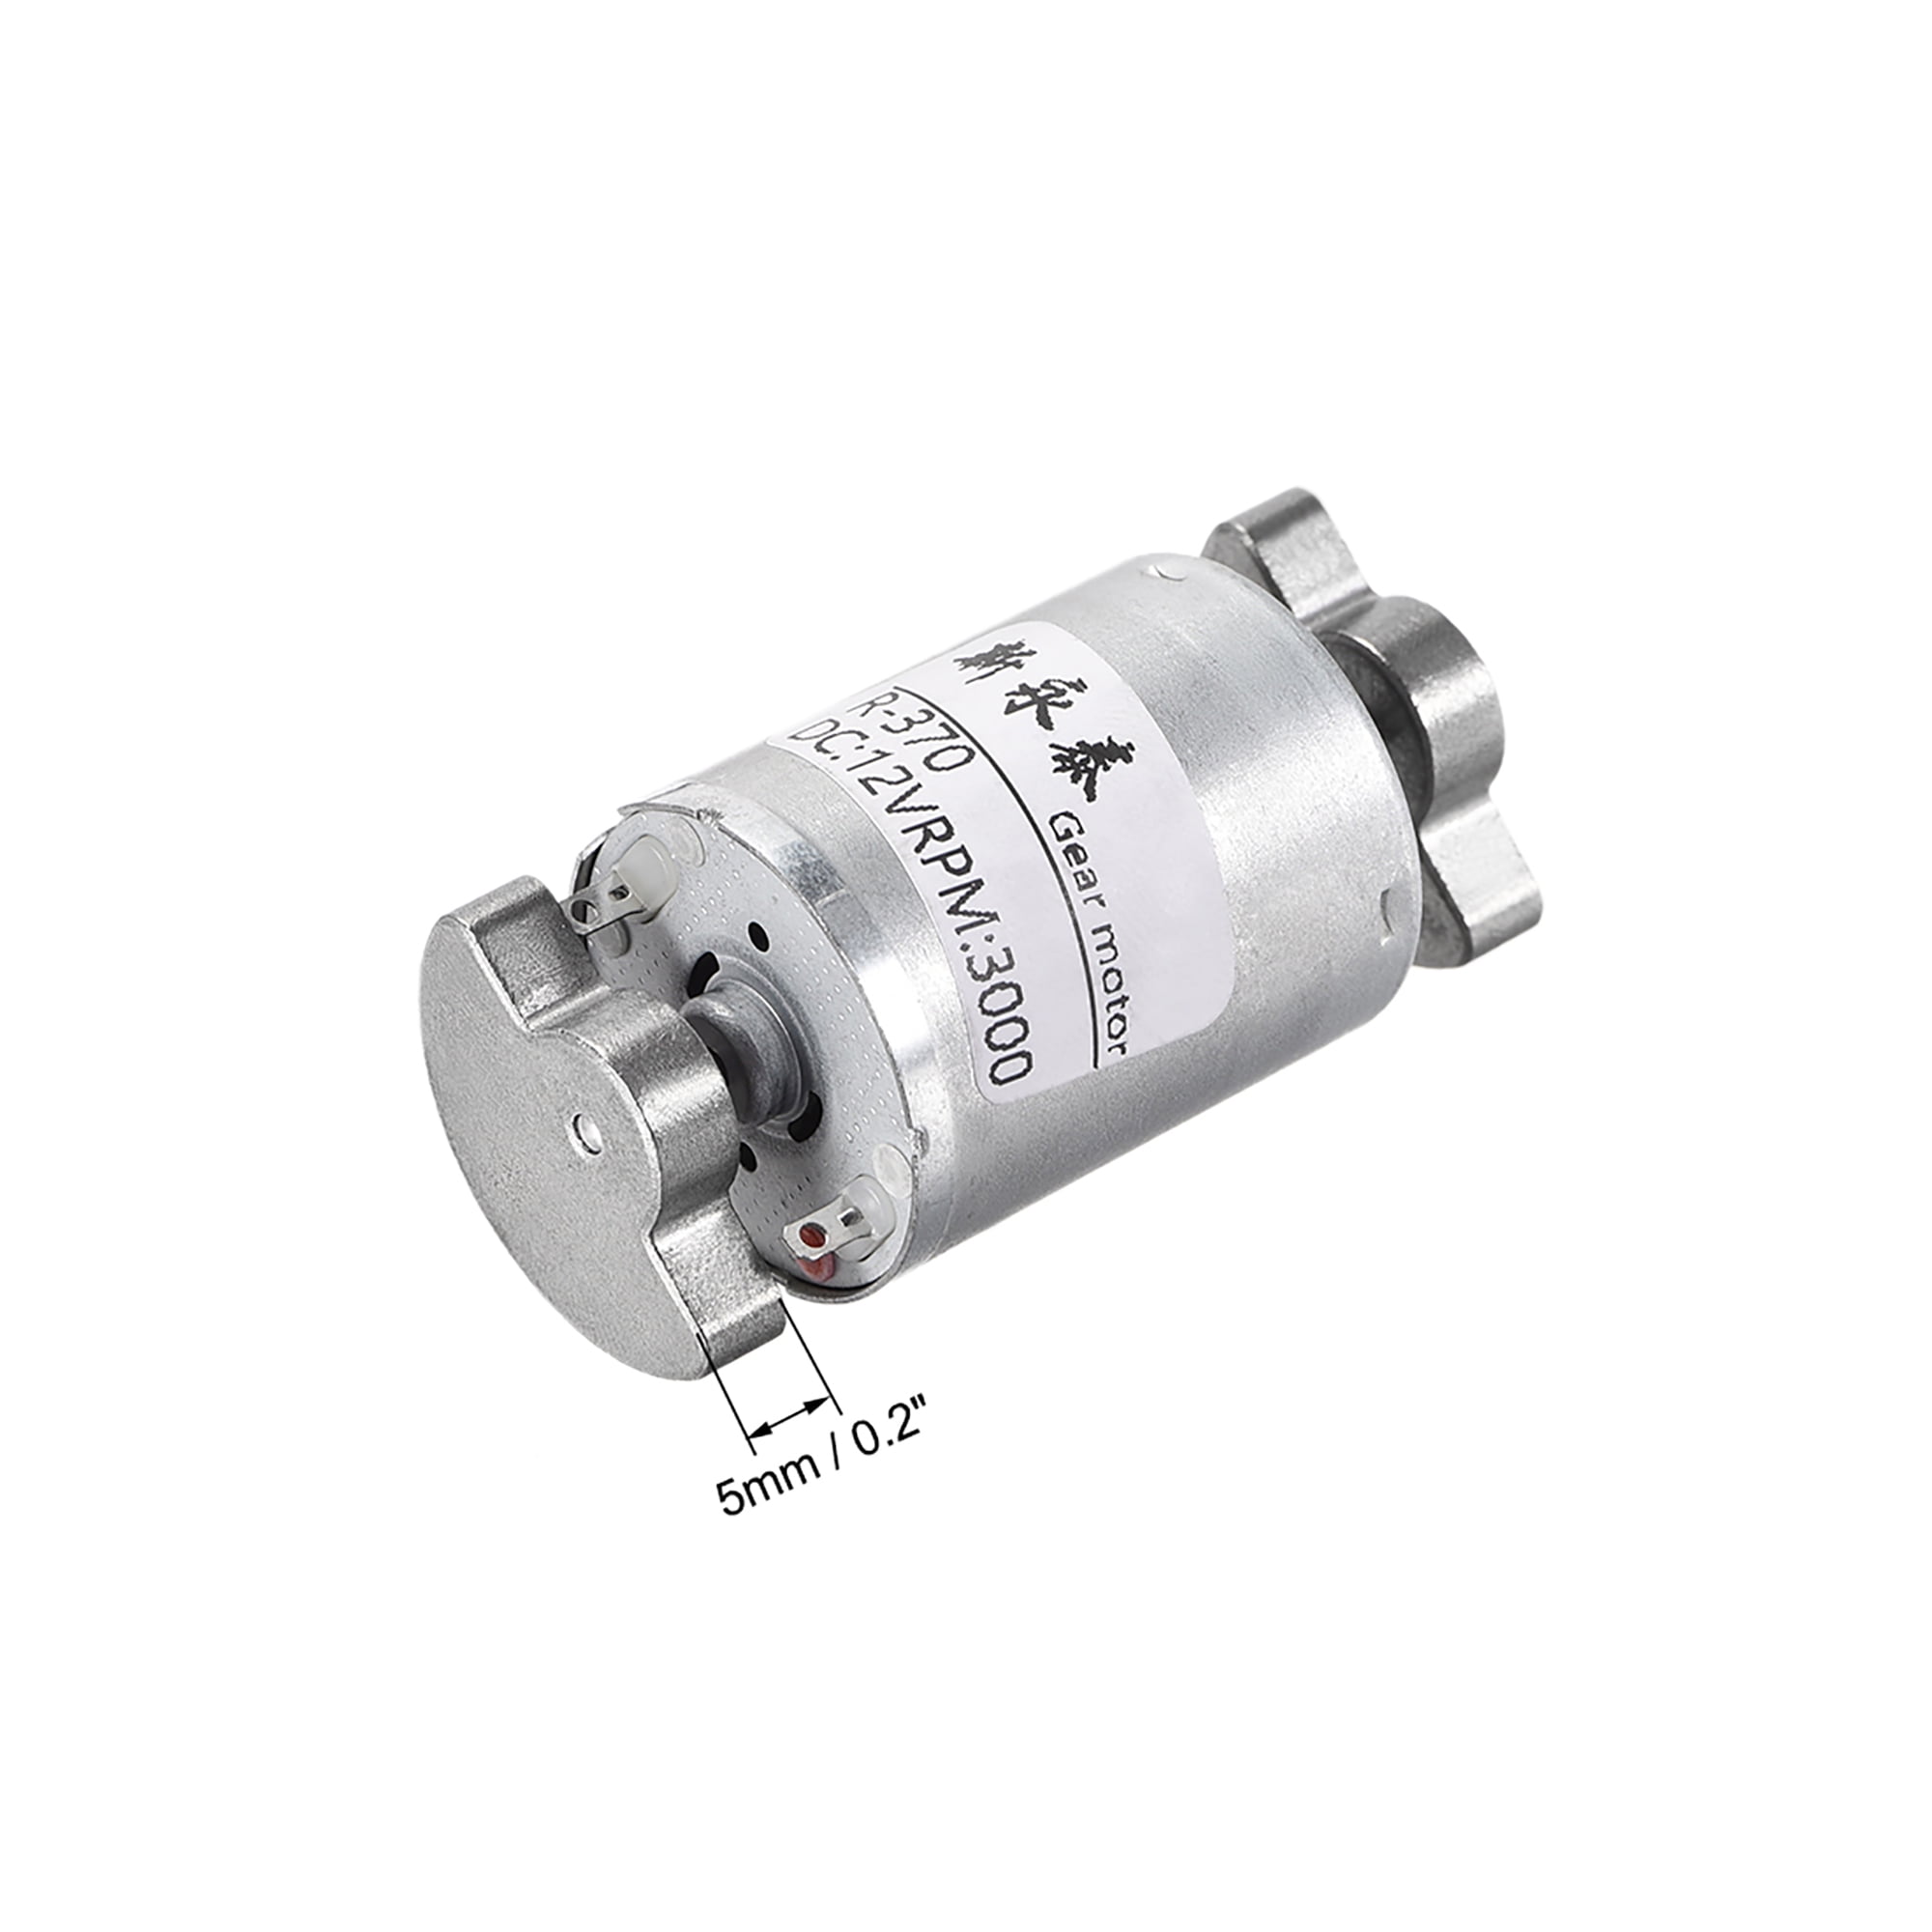 sourcing map Double Shaft Vibration Motors DC 12V 3000RPM Strong Power Dual Head Massager Vibrating Motor 51x24.2mm